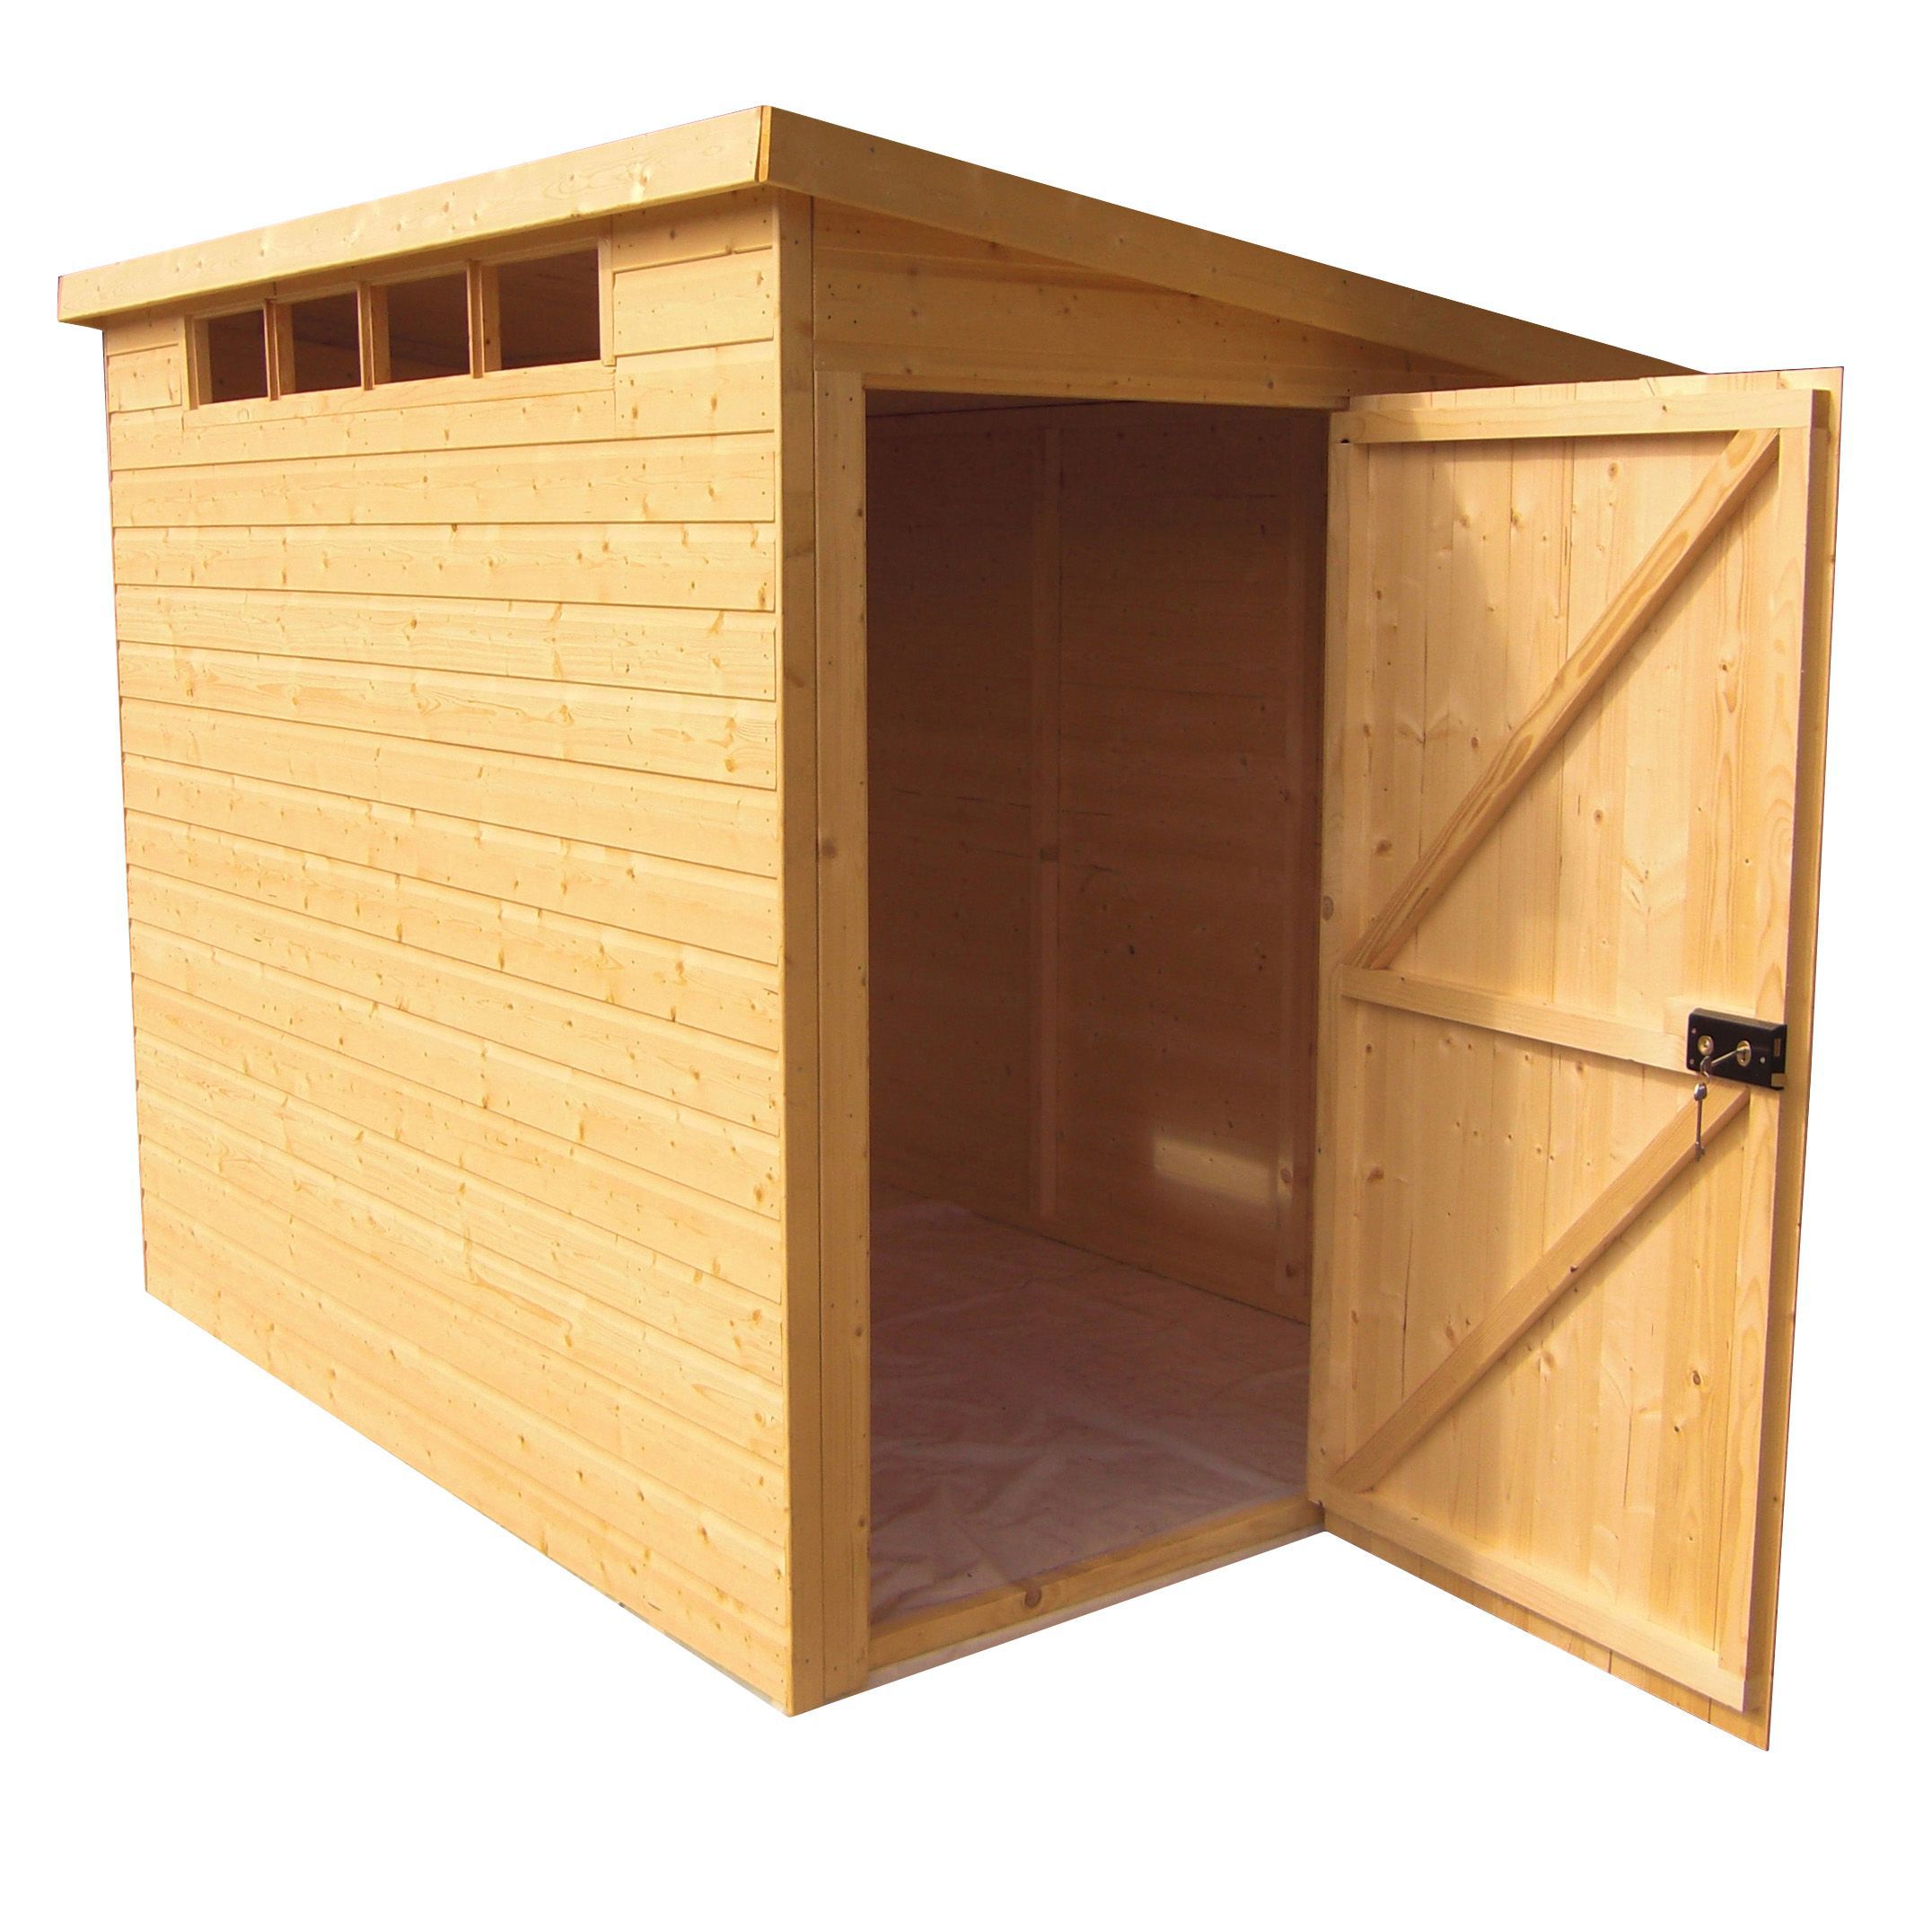 Shire 10x8 Pent Shed - Base not includedAssembly service included